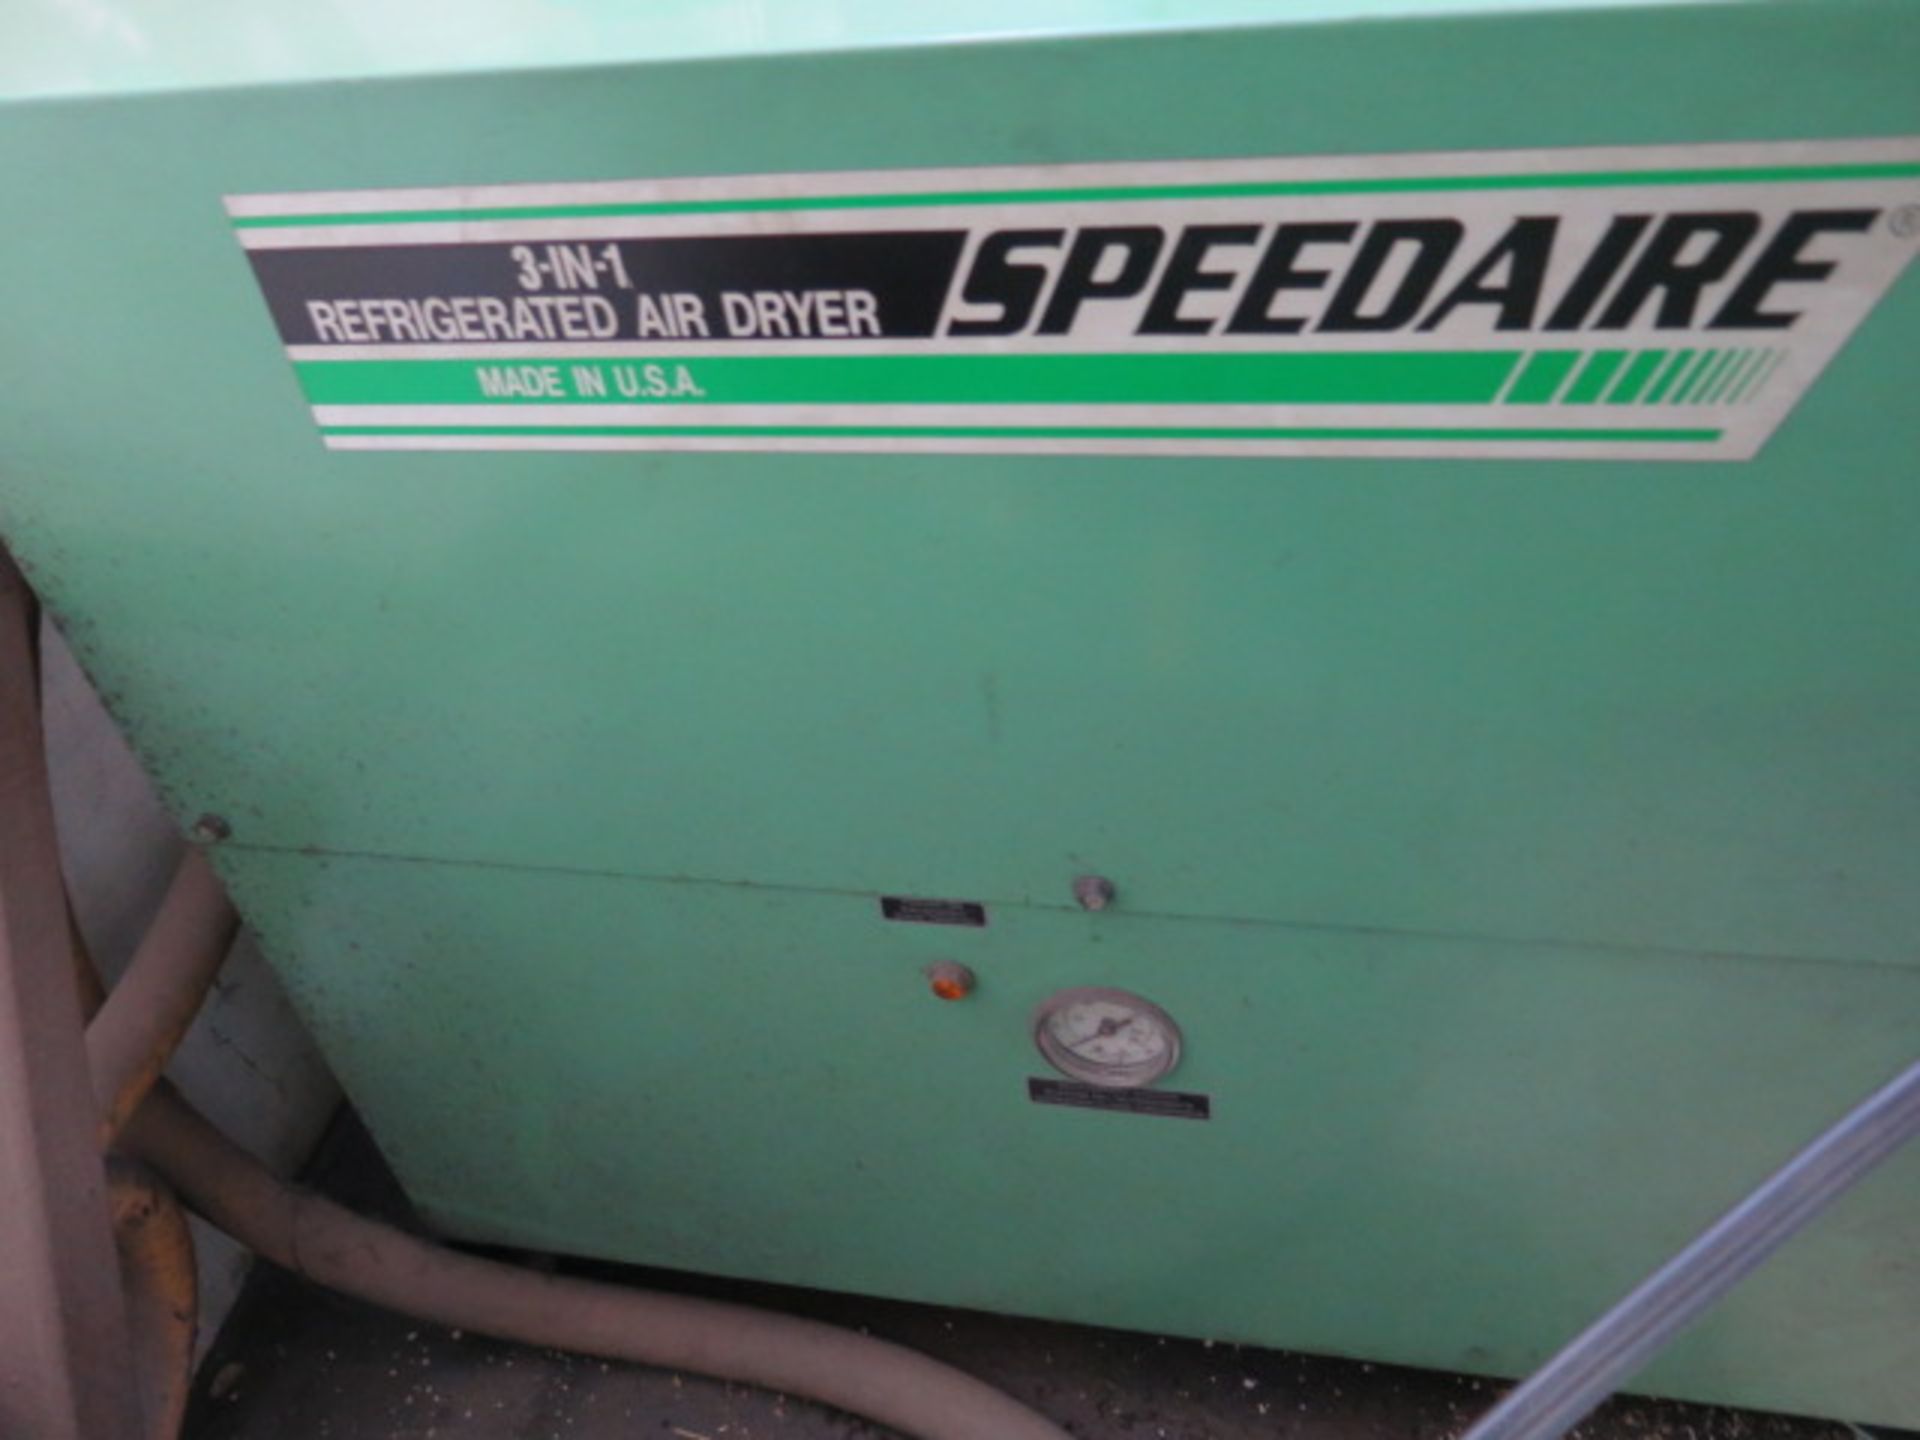 Speedaire 3-In-1 Refrigerated Air Dryer - Image 2 of 2